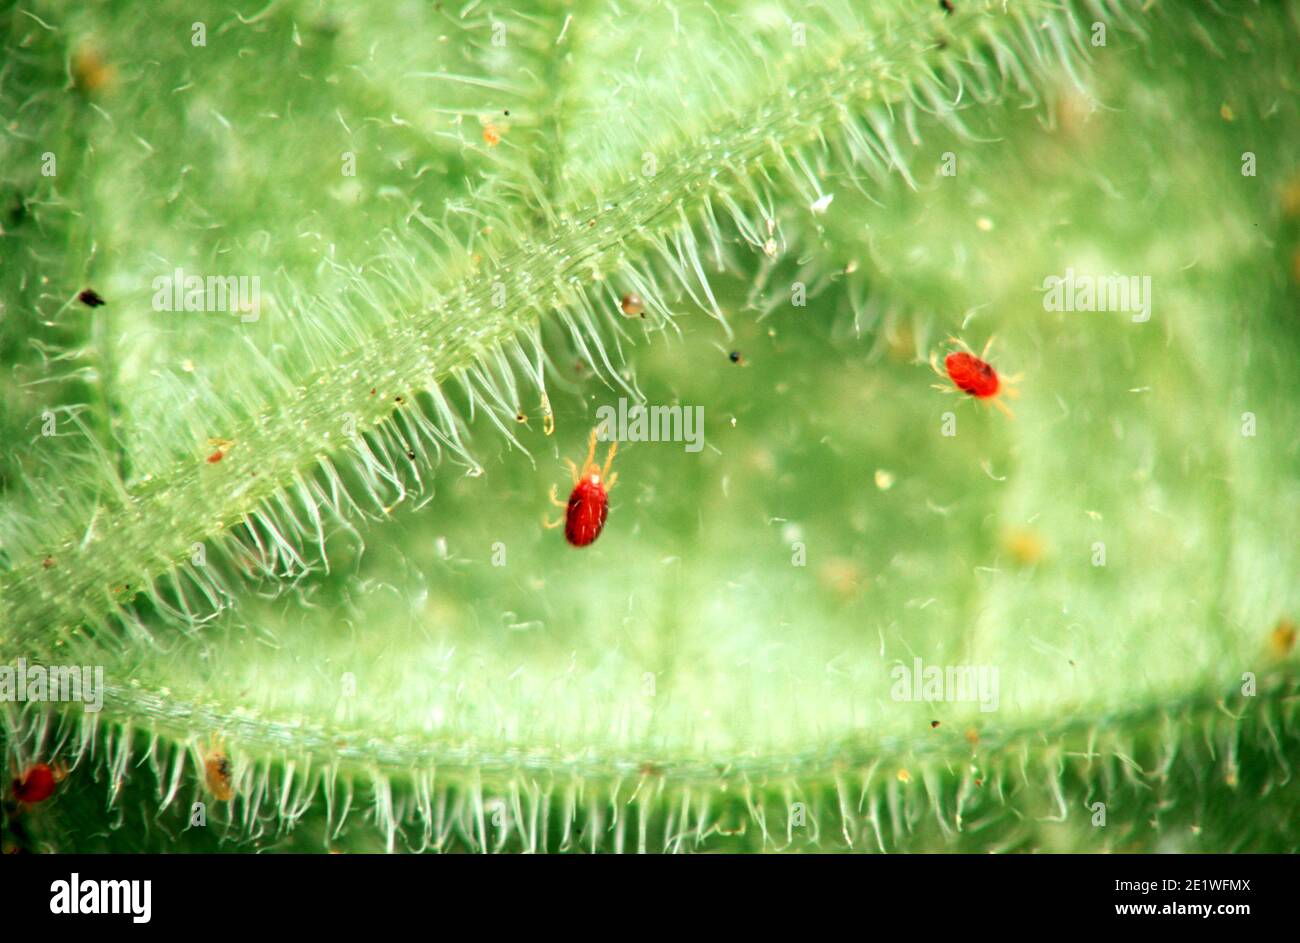 Tetranychus urticae (common names include red spider mite and two-spotted spider mite) is a species of plant-feeding mite. Stock Photo